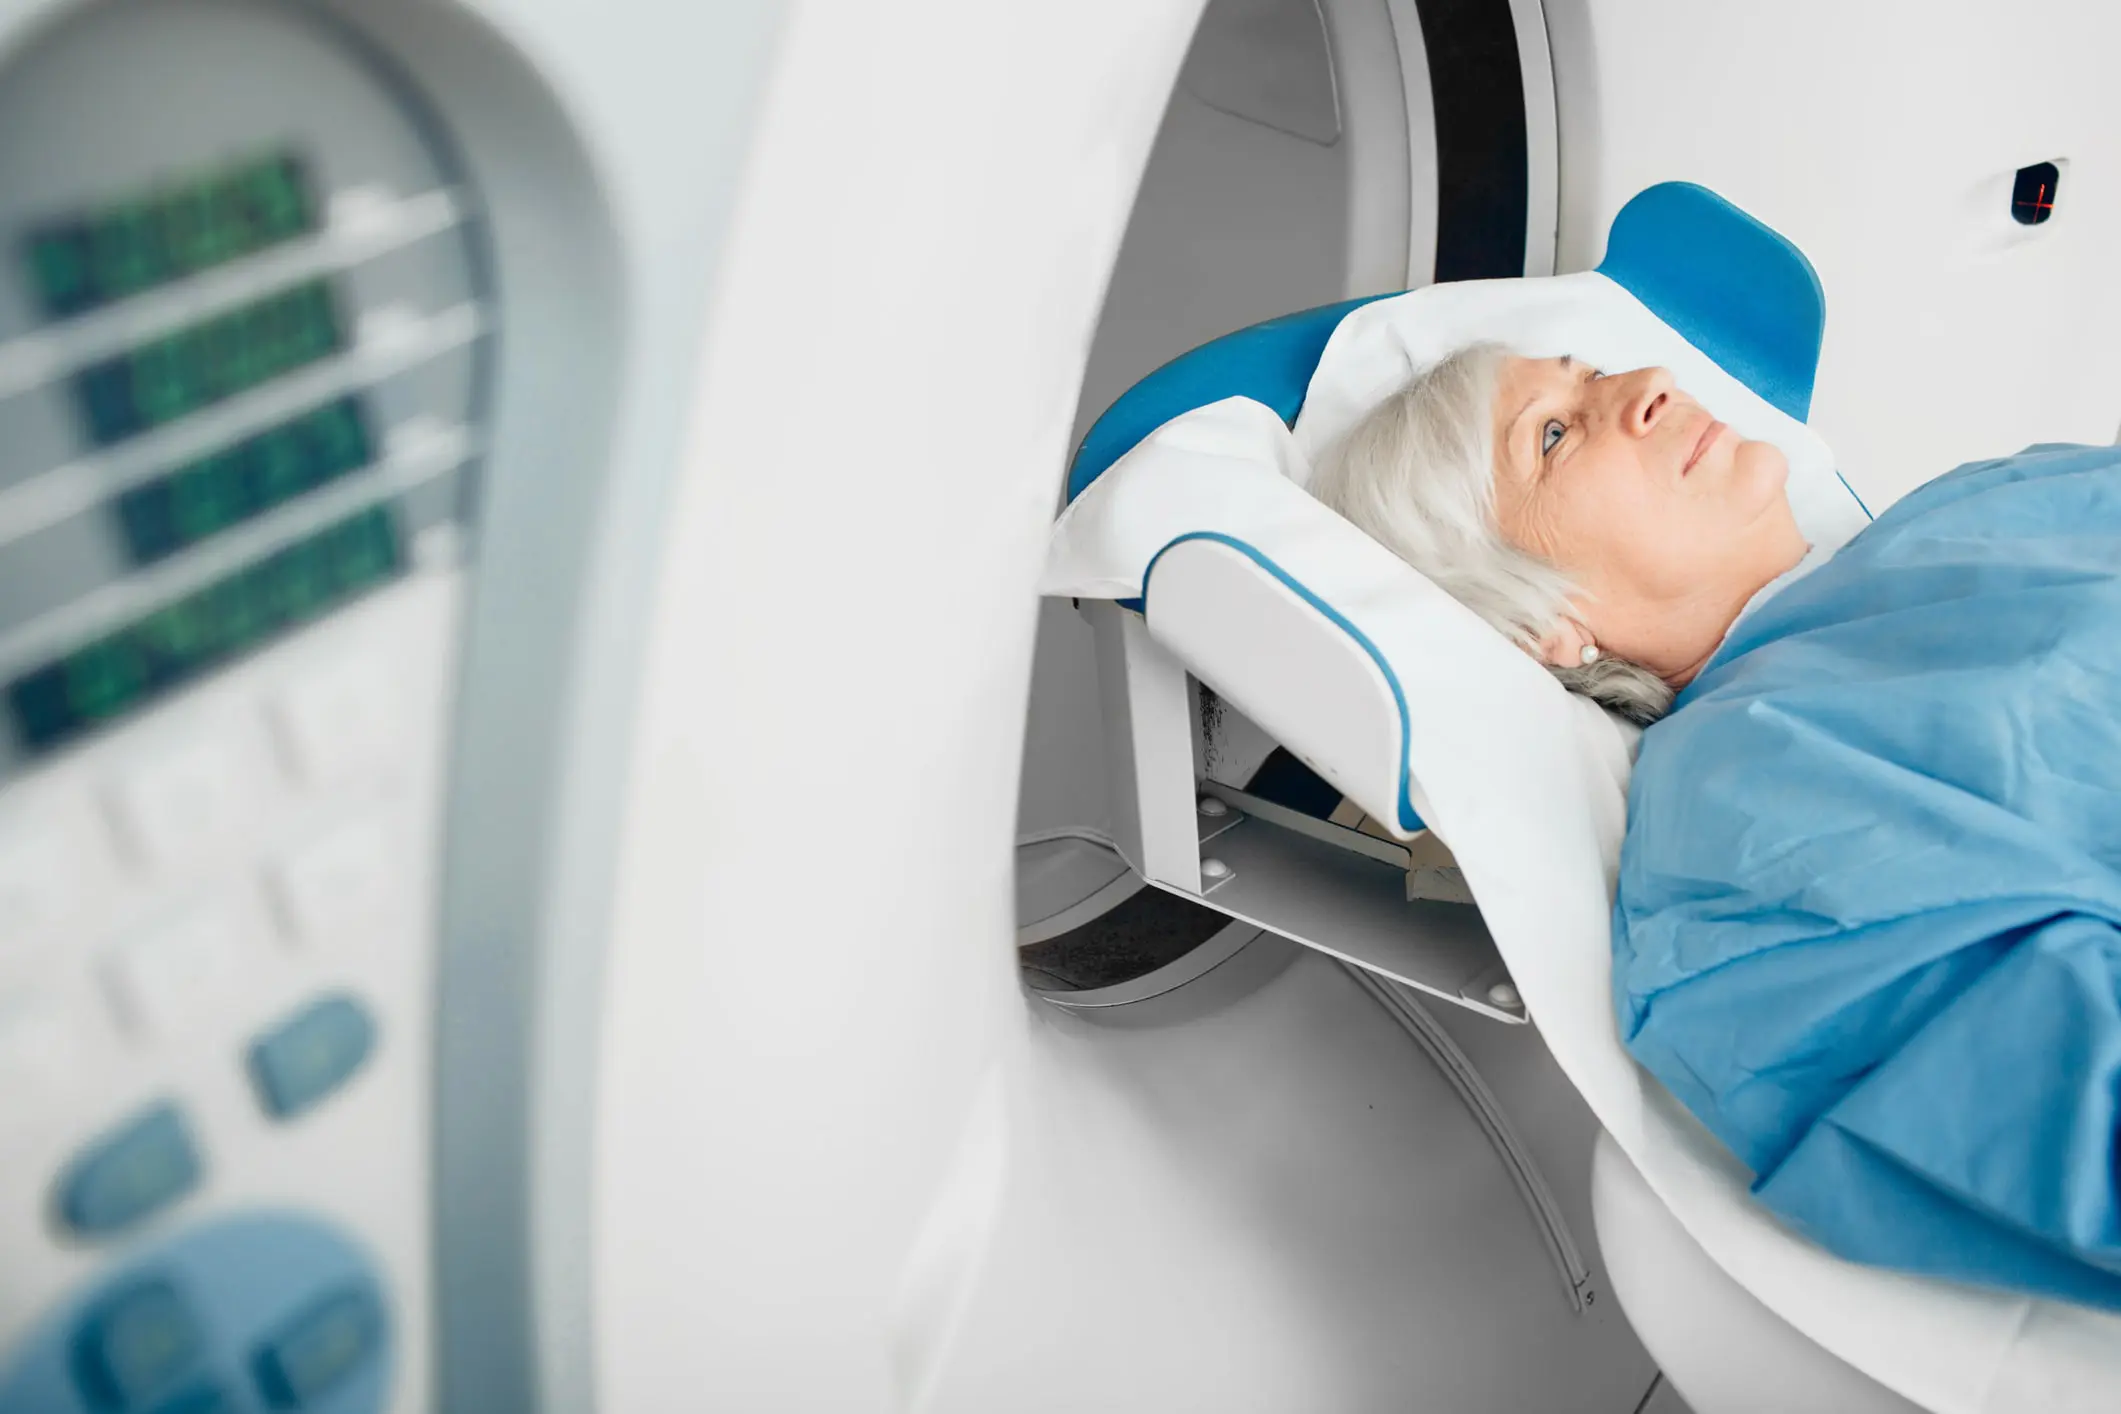 Full body scans: Why some medical professionals have concerns